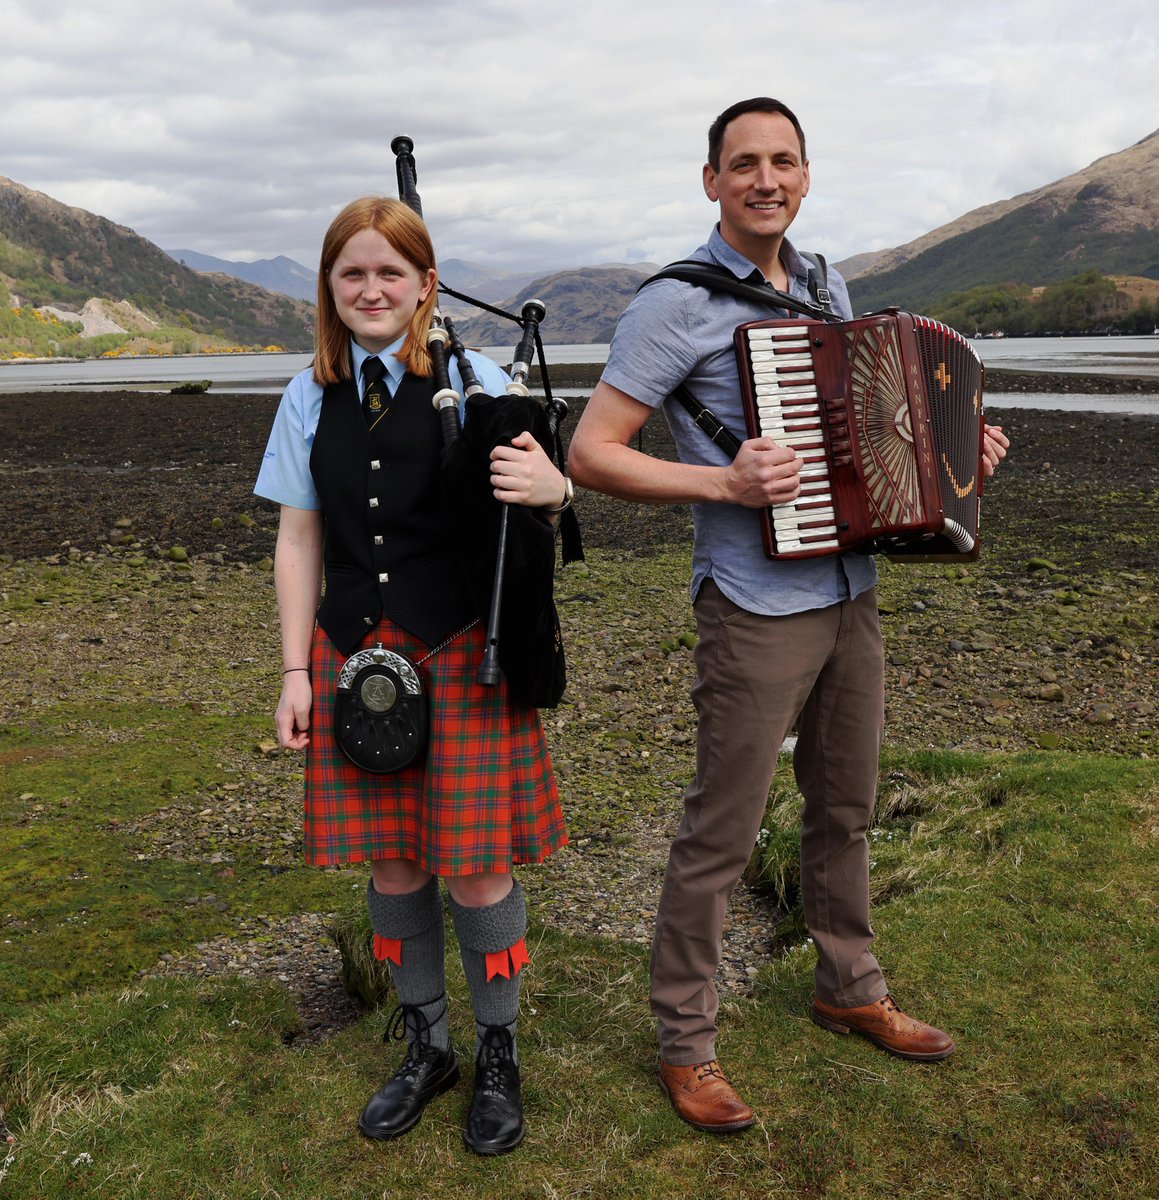 🏴󠁧󠁢󠁳󠁣󠁴󠁿 Call for Scots to get involved in inaugural Scottish Folk Day

The first ever #ScottishFolkDay will take place on 23rd Sept 2023 celebrating the country's vibrant and varied folk scene, in tandem with #EuropeanFolkDay held on the same date.

Read more: bit.ly/3HyzauD